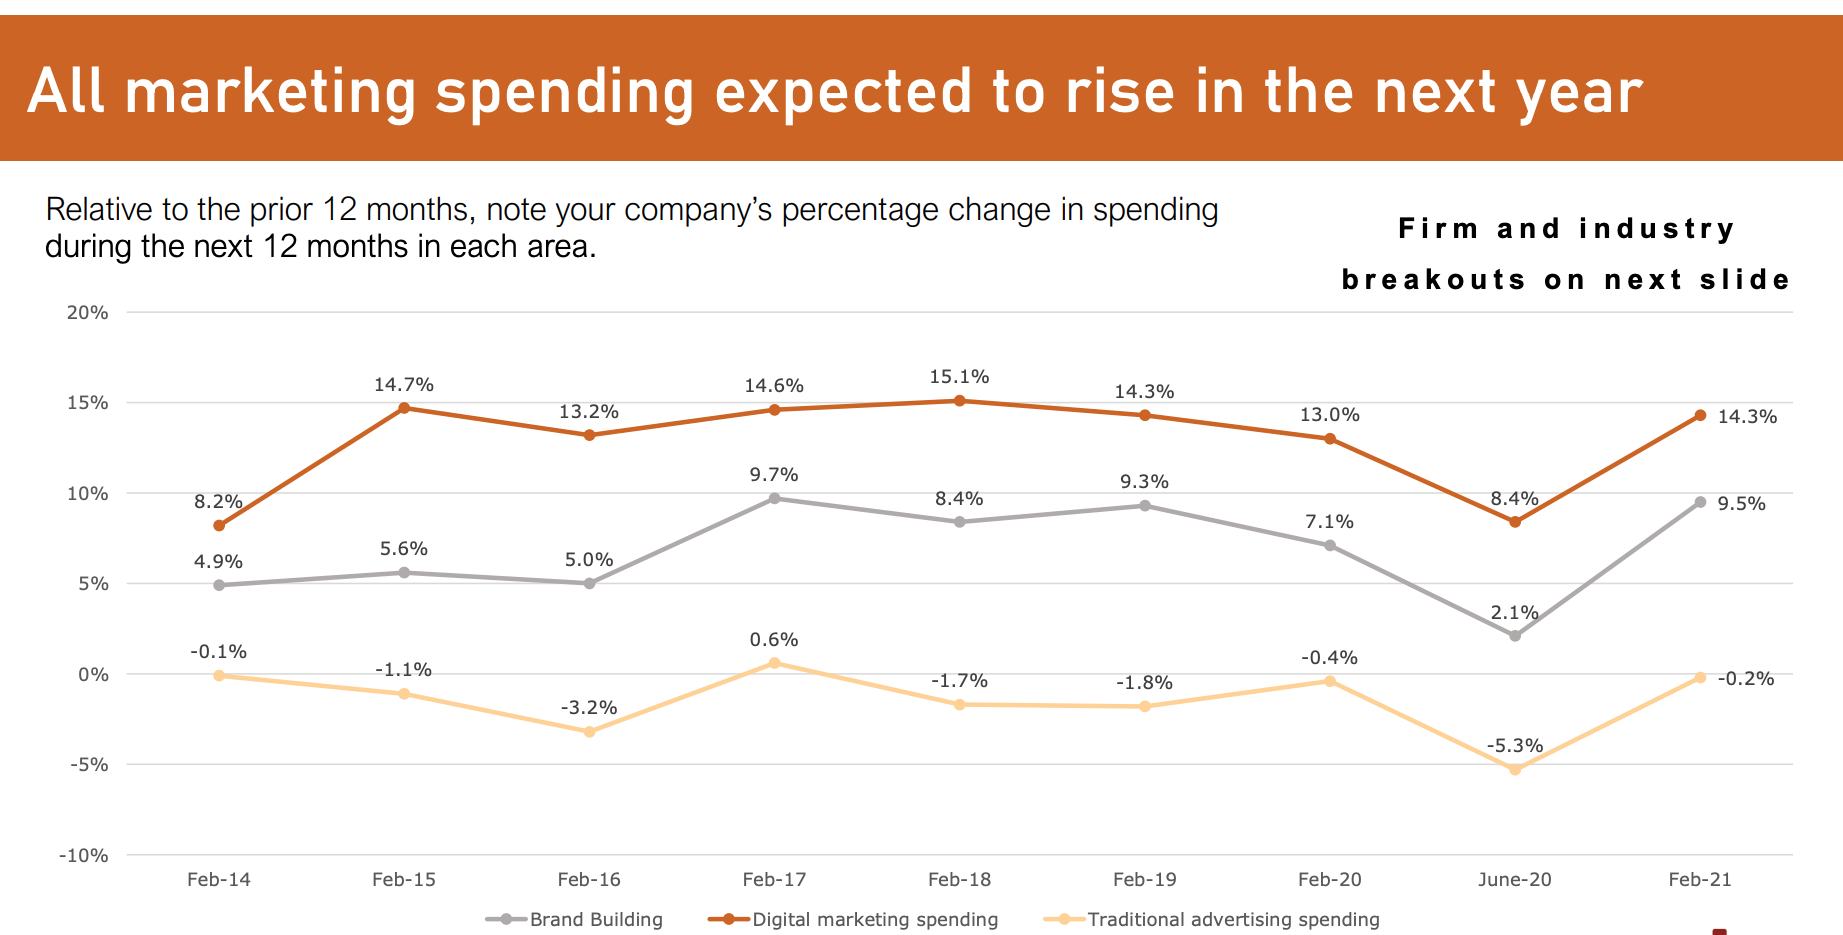 Marketing spending is expected to rise.